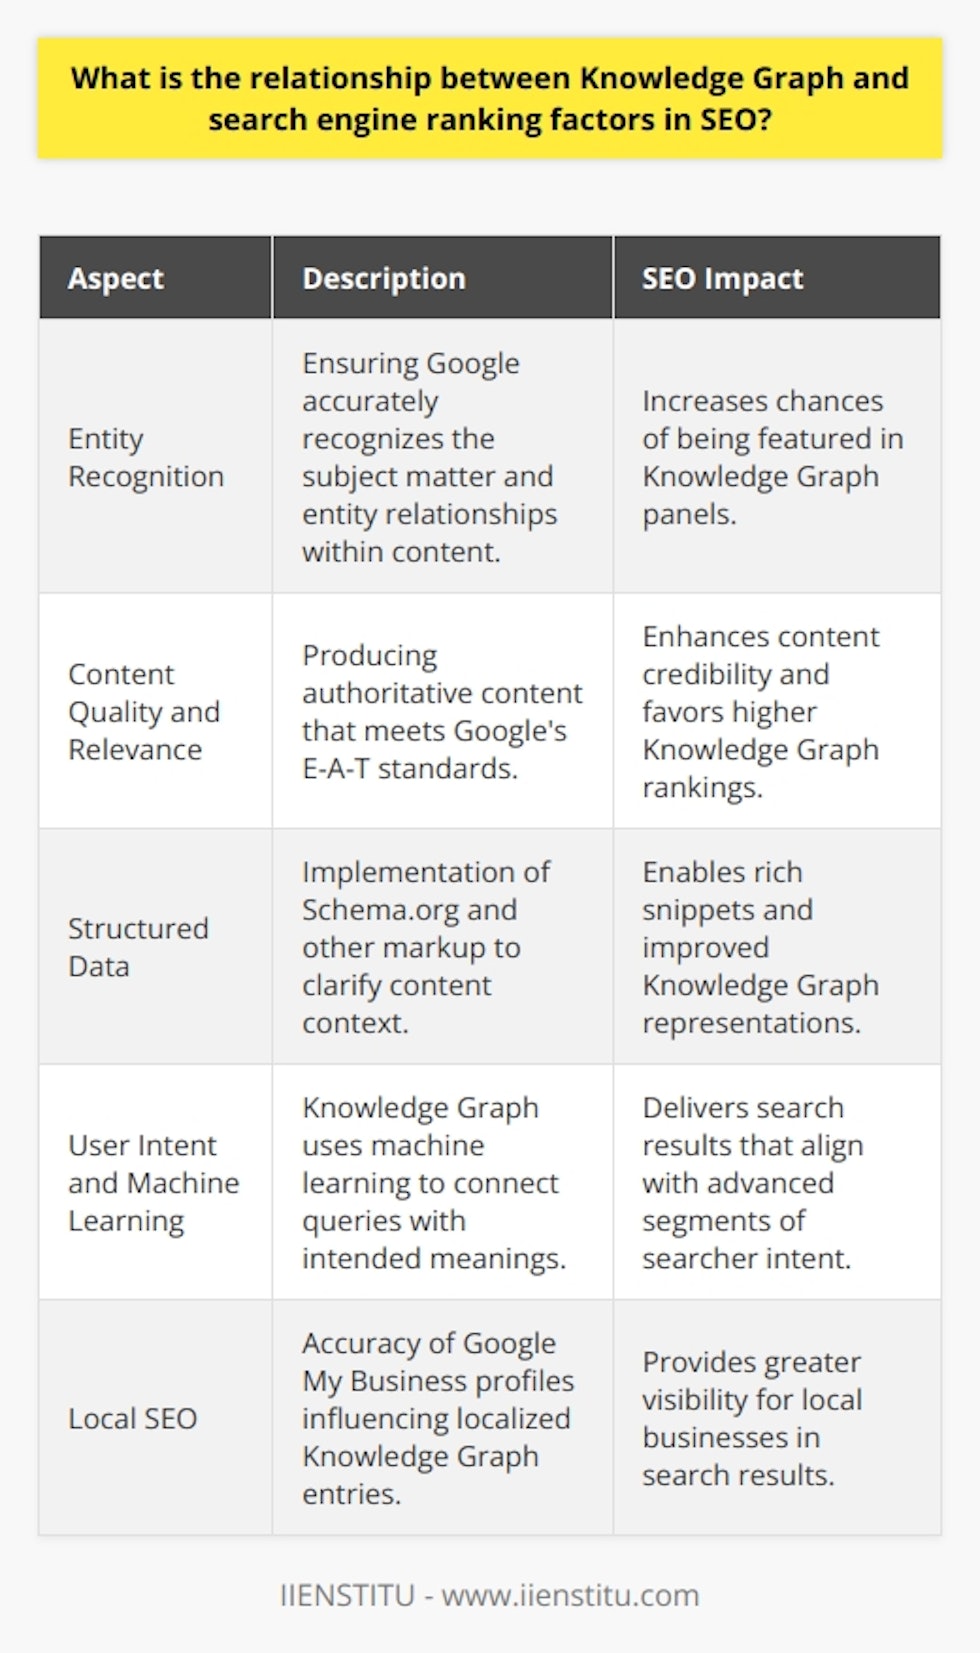 The relationship between Google's Knowledge Graph and search engine ranking in SEO is intrinsically linked to how Google interprets and presents information to its users. The Knowledge Graph significantly influences how Google understands the relationships between different entities and concepts, facilitating a more intuitive search experience.Impact of Knowledge Graph on Search RankingsThe Knowledge Graph's primary objective is to comprehend and connect information about entities and their attributes, thus empowering Google's search algorithms to present more accurate summaries and direct answers to queries right within the search results page. For businesses and content creators, appearing in these Knowledge Graph boxes or panels can lead to increased visibility and potentially higher click-through rates. This is especially true for queries that relate directly to entities such as persons, places, organizations, or events.Optimization for Knowledge Graph1. **Entity Recognition**: One key strategy is to ensure that Google recognizes the entity that your content represents. This is achieved by maintaining a clear focus on subjects and by organizing information in a way that outlines clear relationships between different entities.2. **Content Quality and Relevance**: The content you produce must be authoritative and offer intrinsic value. Google favors content that exemplifies expertise, authoritativeness, and trustworthiness (E-A-T). Knowledge Graph rankings are not just about having content; the content must be deemed credible and of high quality by Google's algorithms.3. **Structured Data**: By implementing structured data markup (such as Schema.org vocabulary), webmasters can assist search engines in understanding the context of their content. This allows the site to feature enhanced information in SERPs, such as rich snippets, that can lead to Knowledge Graph listings.The Knowledge Graph and User IntentUnderstanding user intent is a cornerstone of SEO. Google's Knowledge Graph heightens this by using machine learning to build connections between user queries and their intended meaning. It guides Google's algorithms to interpret nuanced questions and deliver results that match searcher intent on a more advanced level than keyword matching alone.The Knowledge Graph's EvolutionOriginally, the Knowledge Graph's primary focus was on broad, general knowledge topics, but it has significantly evolved to cover more specific and niche topics. It regularly pulls from various sources, such as Wikipedia, Wikidata, and the CIA World Factbook, and it also uses data from across the web that it can verify as authoritative and accurate.Local SEO and the Knowledge GraphFor local SEO, the Knowledge Graph can directly influence visibility. Local businesses that ensure their Google My Business (GMB) profiles are complete and accurate are more likely to appear in localized Knowledge Graph entries. This can result in significant exposure since the Knowledge Graph can offer high-visibility placement for branded and non-branded searches alike.Summarizing the ImportanceThe Knowledge Graph's impact on SEO cannot be overstated. Rankings are no longer solely dependent on keywords and backlinks; they are also influenced by how well a website communicates and establishes itself as an authority on specific entities. It is a convergence of relevance, context, and authority, deeply intertwined with search engine ranking factors. Knowledge Graph optimization should be a fundamental part of any comprehensive SEO strategy, emphasizing content quality, the provision of clear entity associations, the usage of structured data, and alignment with user intent to gain competitive advantage in the dynamic landscape of search engine rankings.